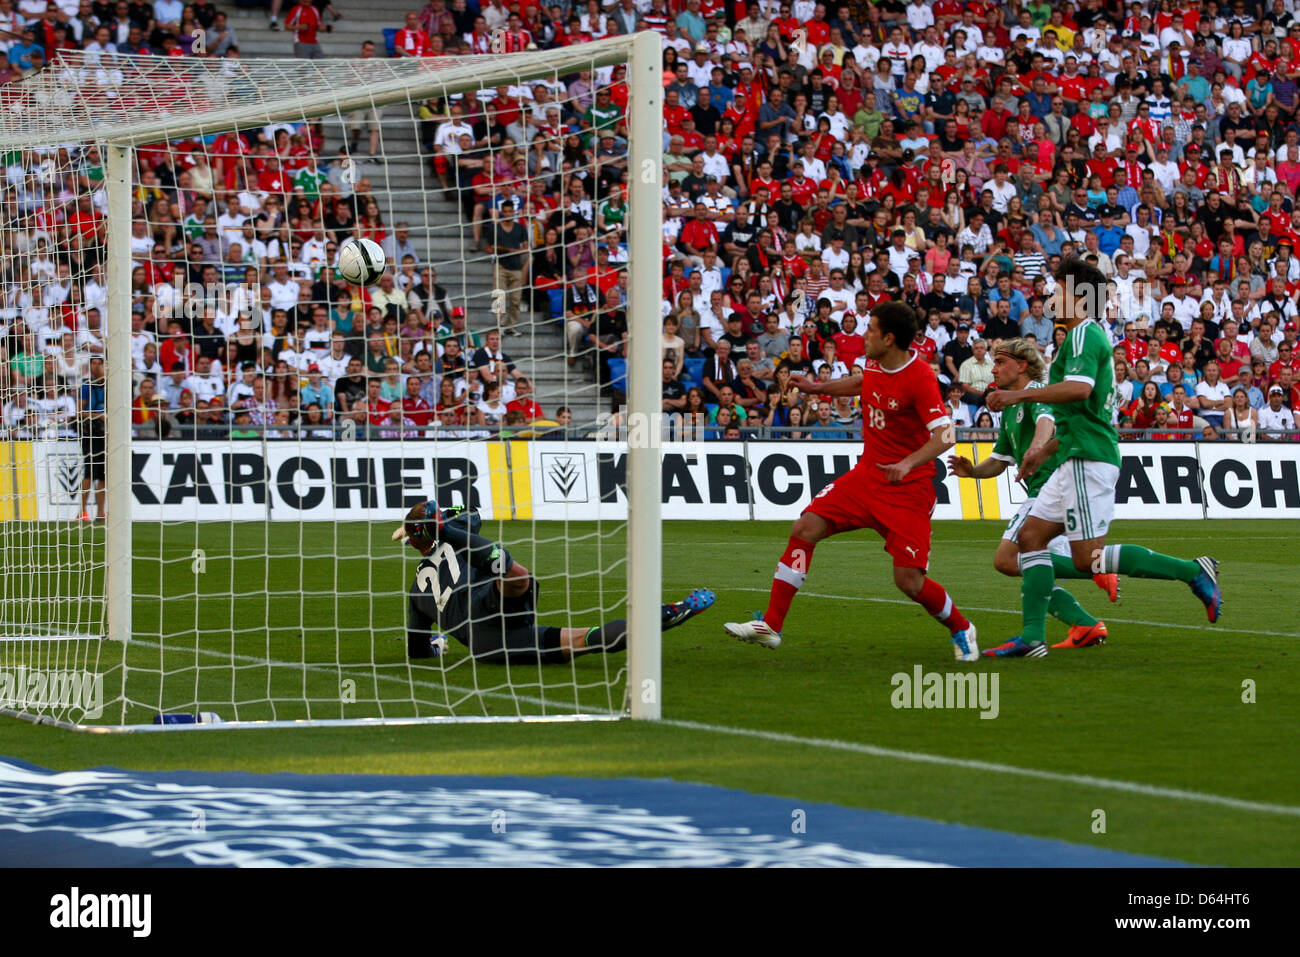 Switzerland's Admir Mehmedi (M) shoots the 3-1 against Germany's goalkeeper Marc-Andre ter Stegen (L) and Mats Hummels during the international friendly soccer match between Switzerland and Germany at St. Jakob Park in Basel, Switzerland, 26 May 2012. Photo: Revierfoto Stock Photo